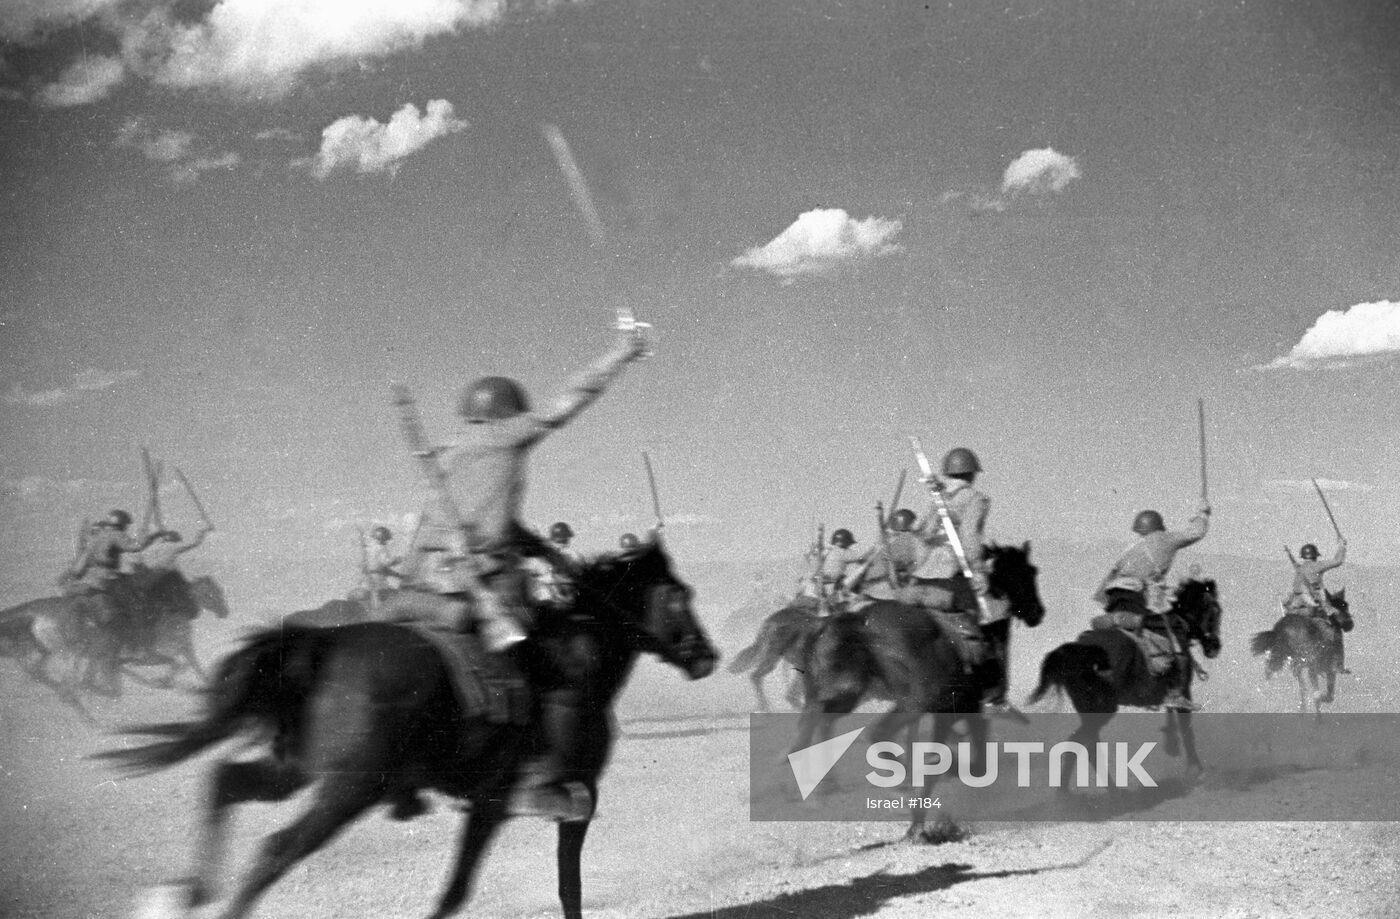 WWII COSSACKS HORSES SABERS ATTACK